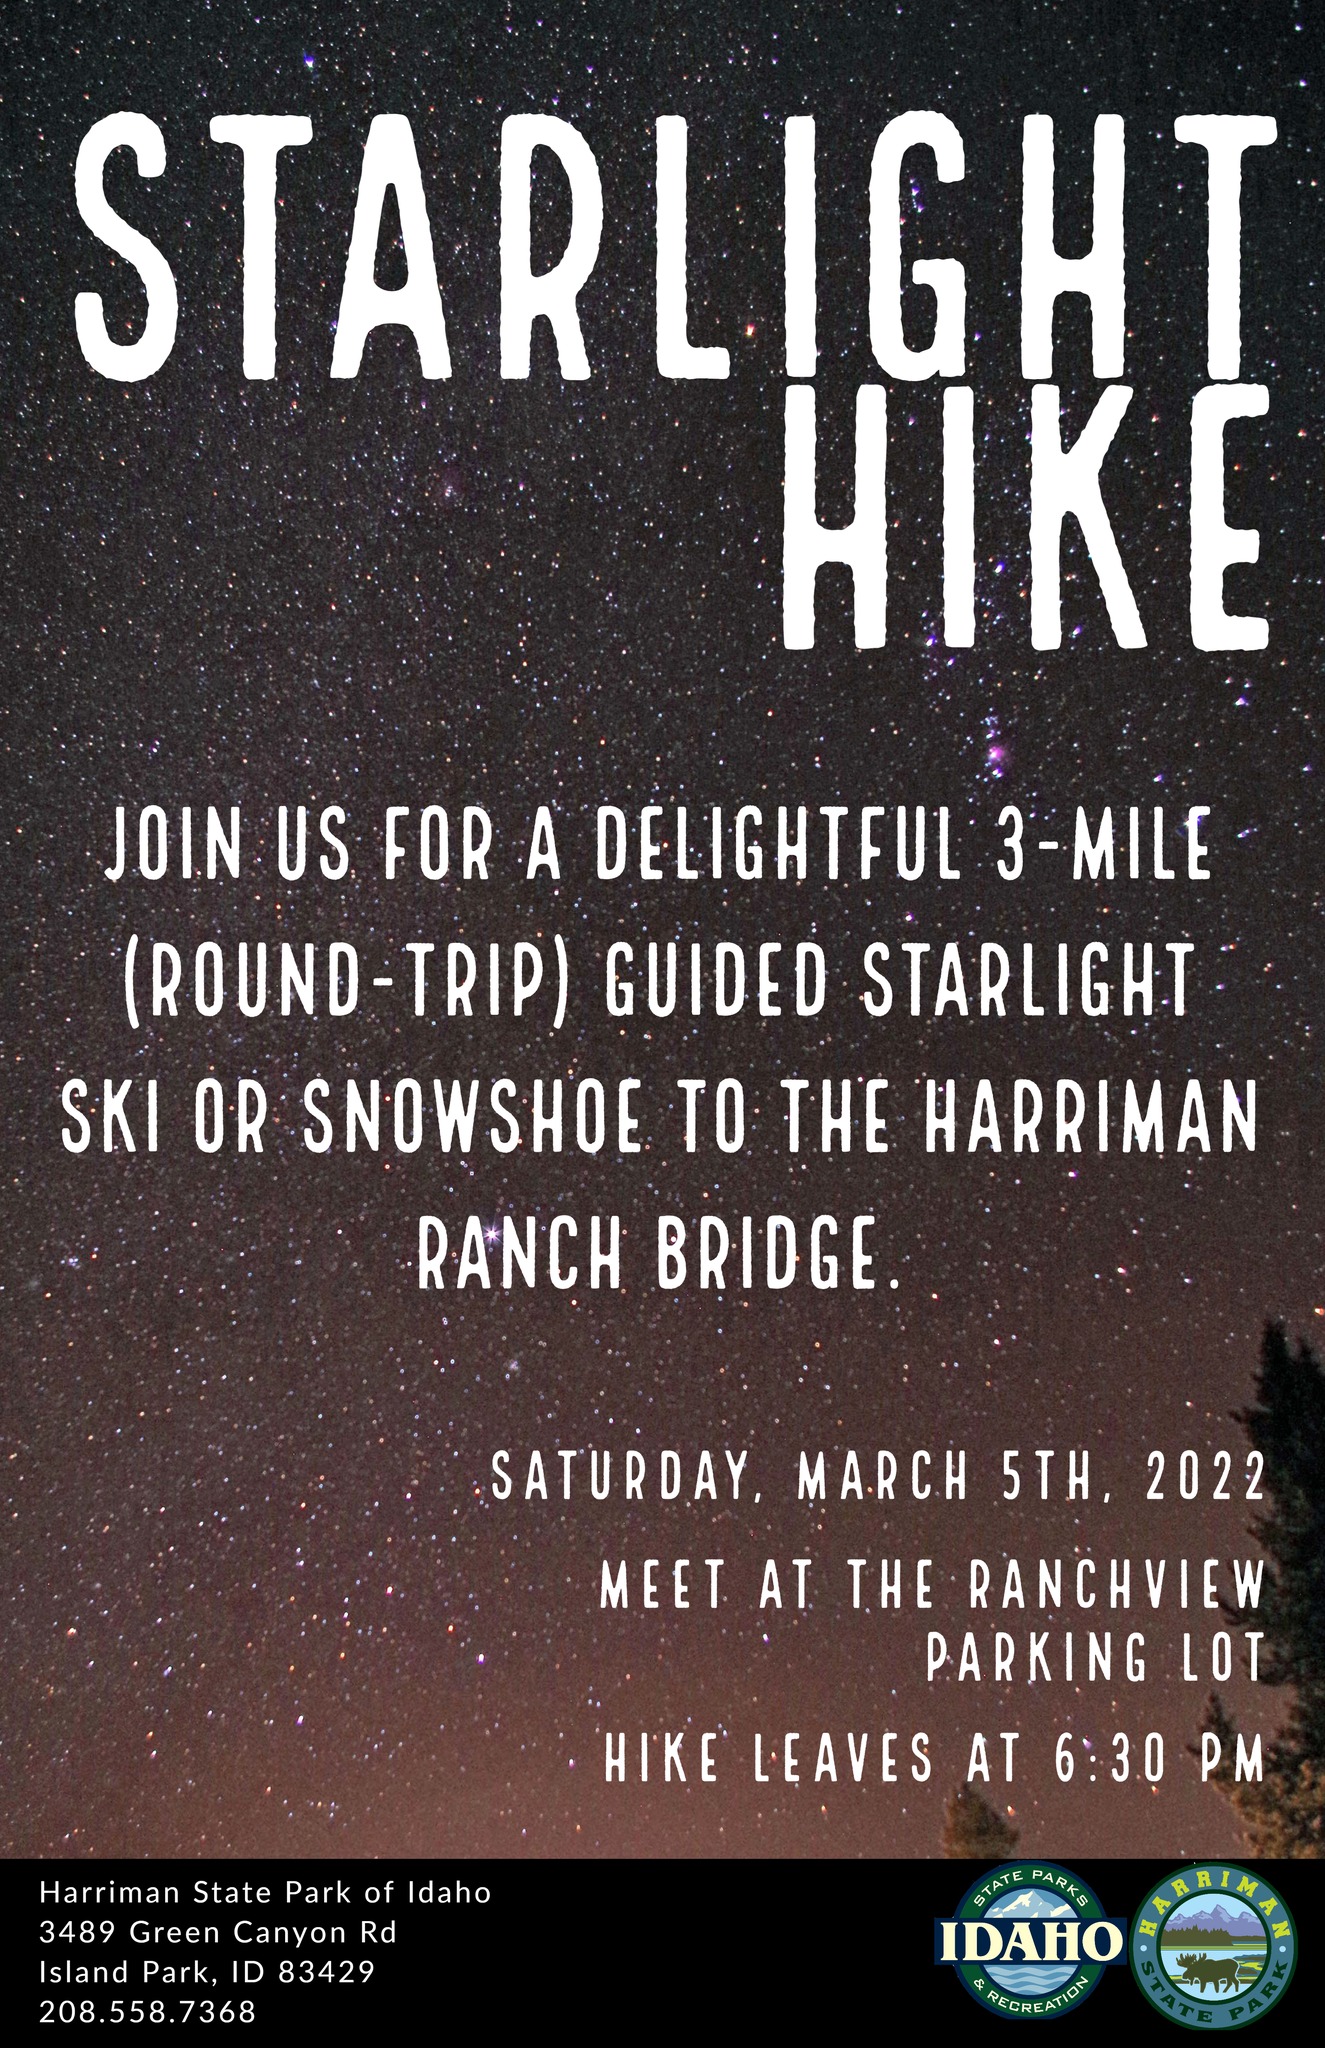 Join us for a delightful guided starlight ski or snowshoe to the Harriman Ranch Bridge (3 miles round trip). This trail provides bright open skies and the perfect setting to view the night sky! Meet at the Ranchview Parking Lot, dress for a winter outdoor adventure. This is a free event. Winter access and motor vehicle entrance fees still apply. ASL Interpretation is available at no cost. Please submit a request seven days, preferably two weeks, in advance by calling 208.558.7368 or by emailing har@idpr.idaho.gov. COVID-19: Park programs follow CDC guidelines